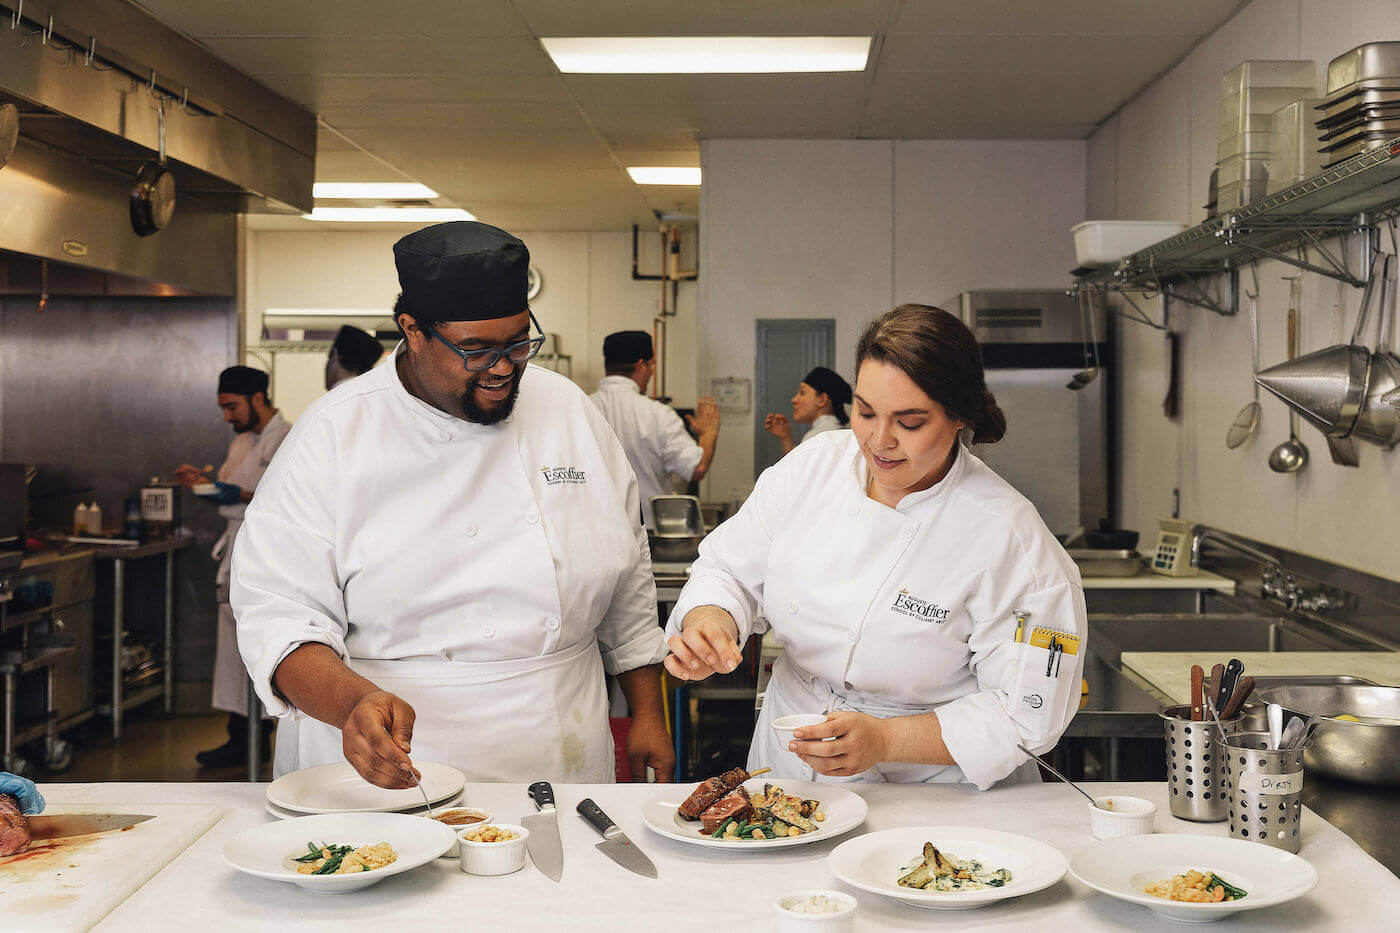 Escoffier culinary students seasoning a plated dish